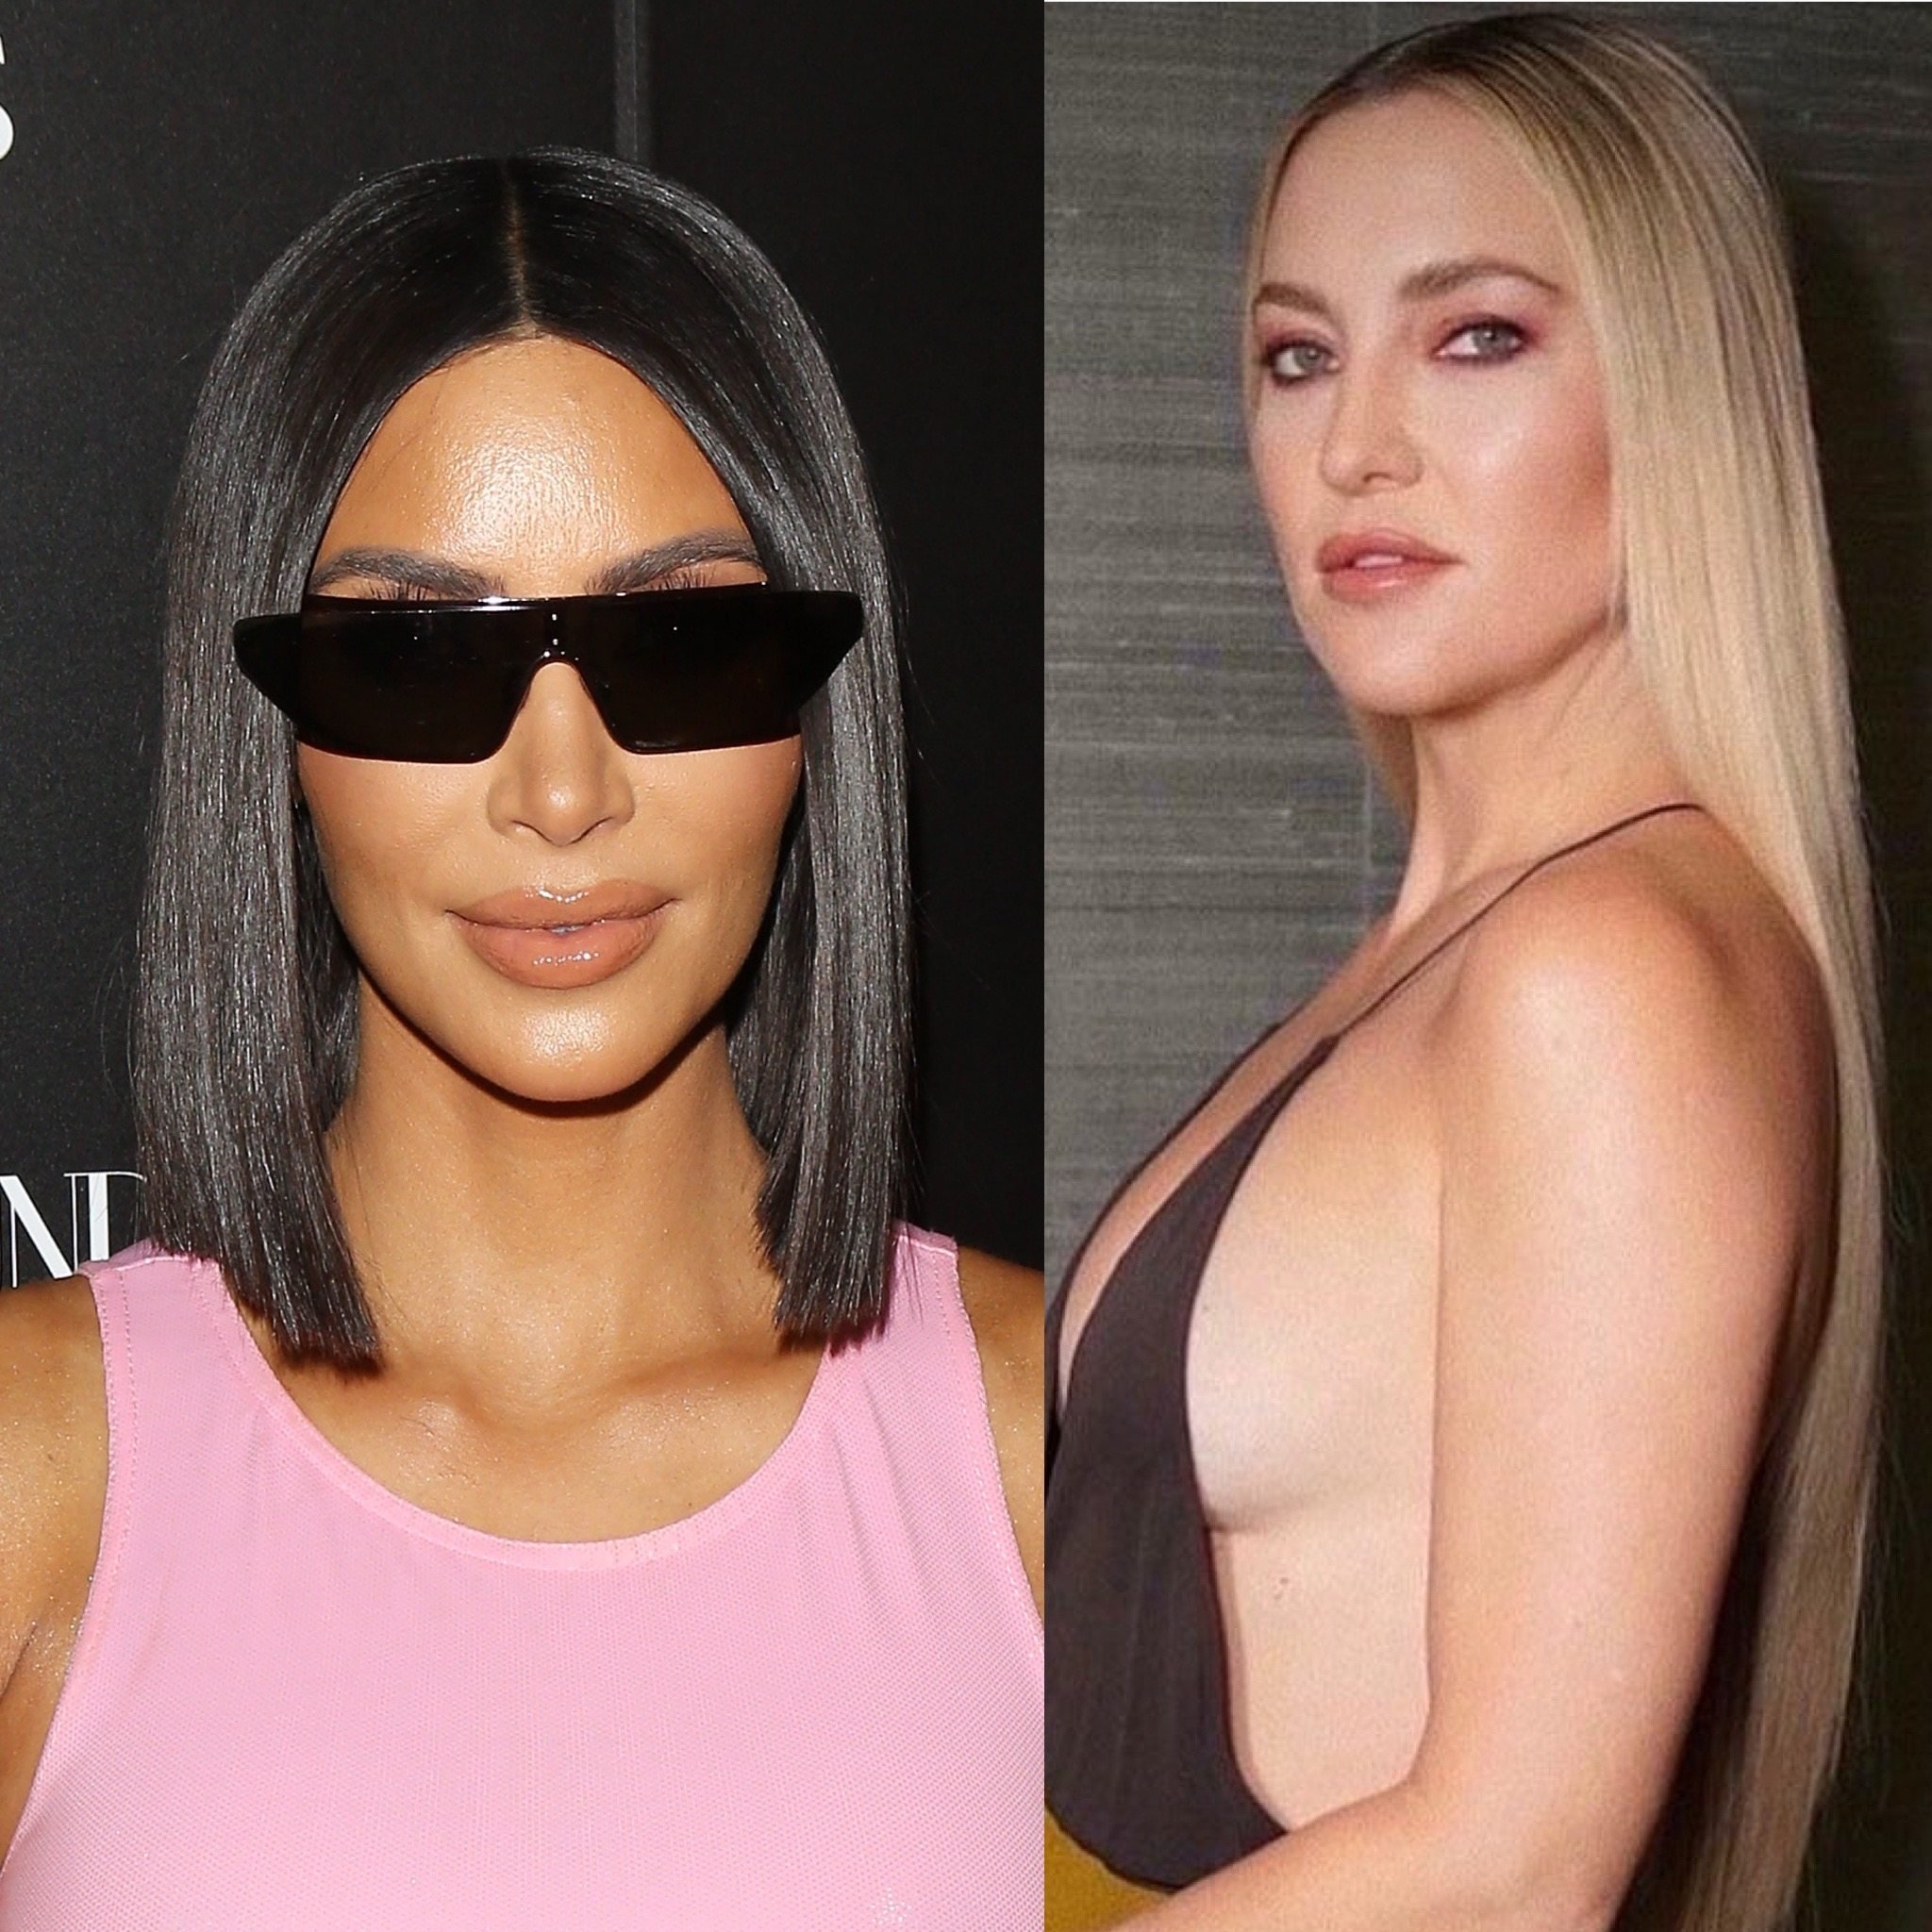 Hair lamination is a treatment that leaves your hair smooth, shiny and frizz-free for weeks at a time – Kim Kardashian (left) and Kate Hudson are fans.